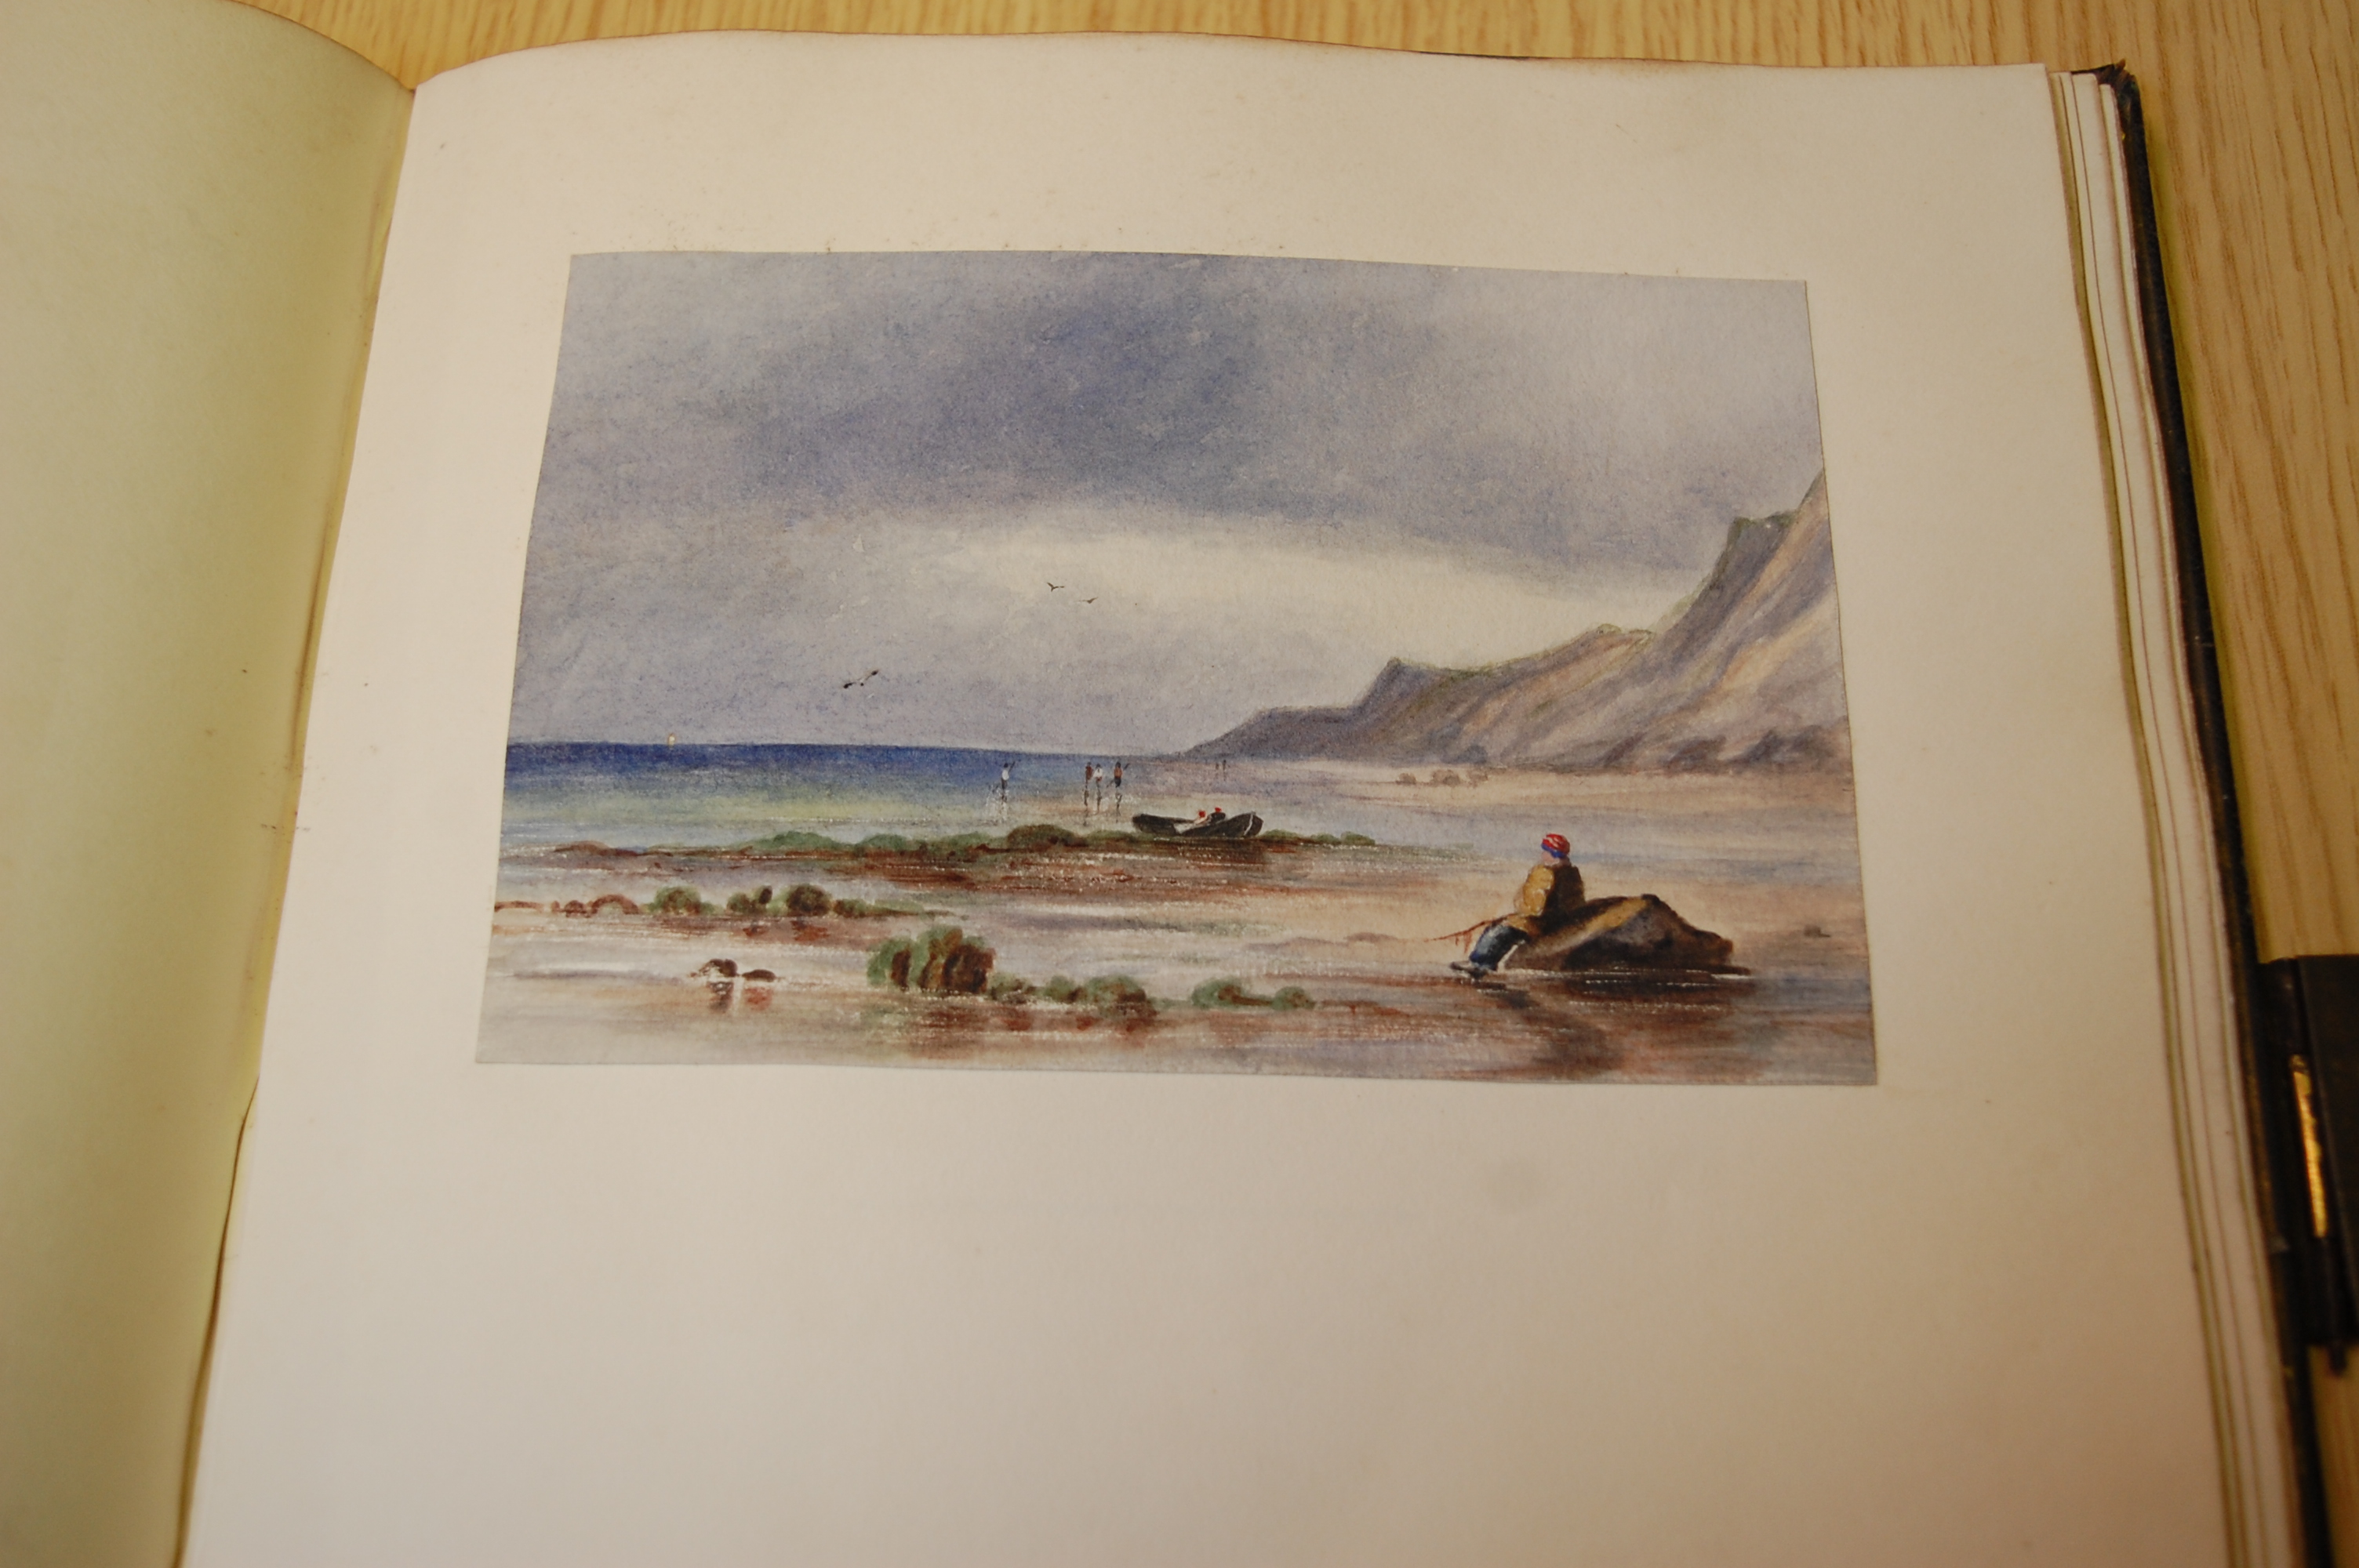 19th century 4to album containing manuscript entries, watercolour and pencil sketches, - Image 9 of 25